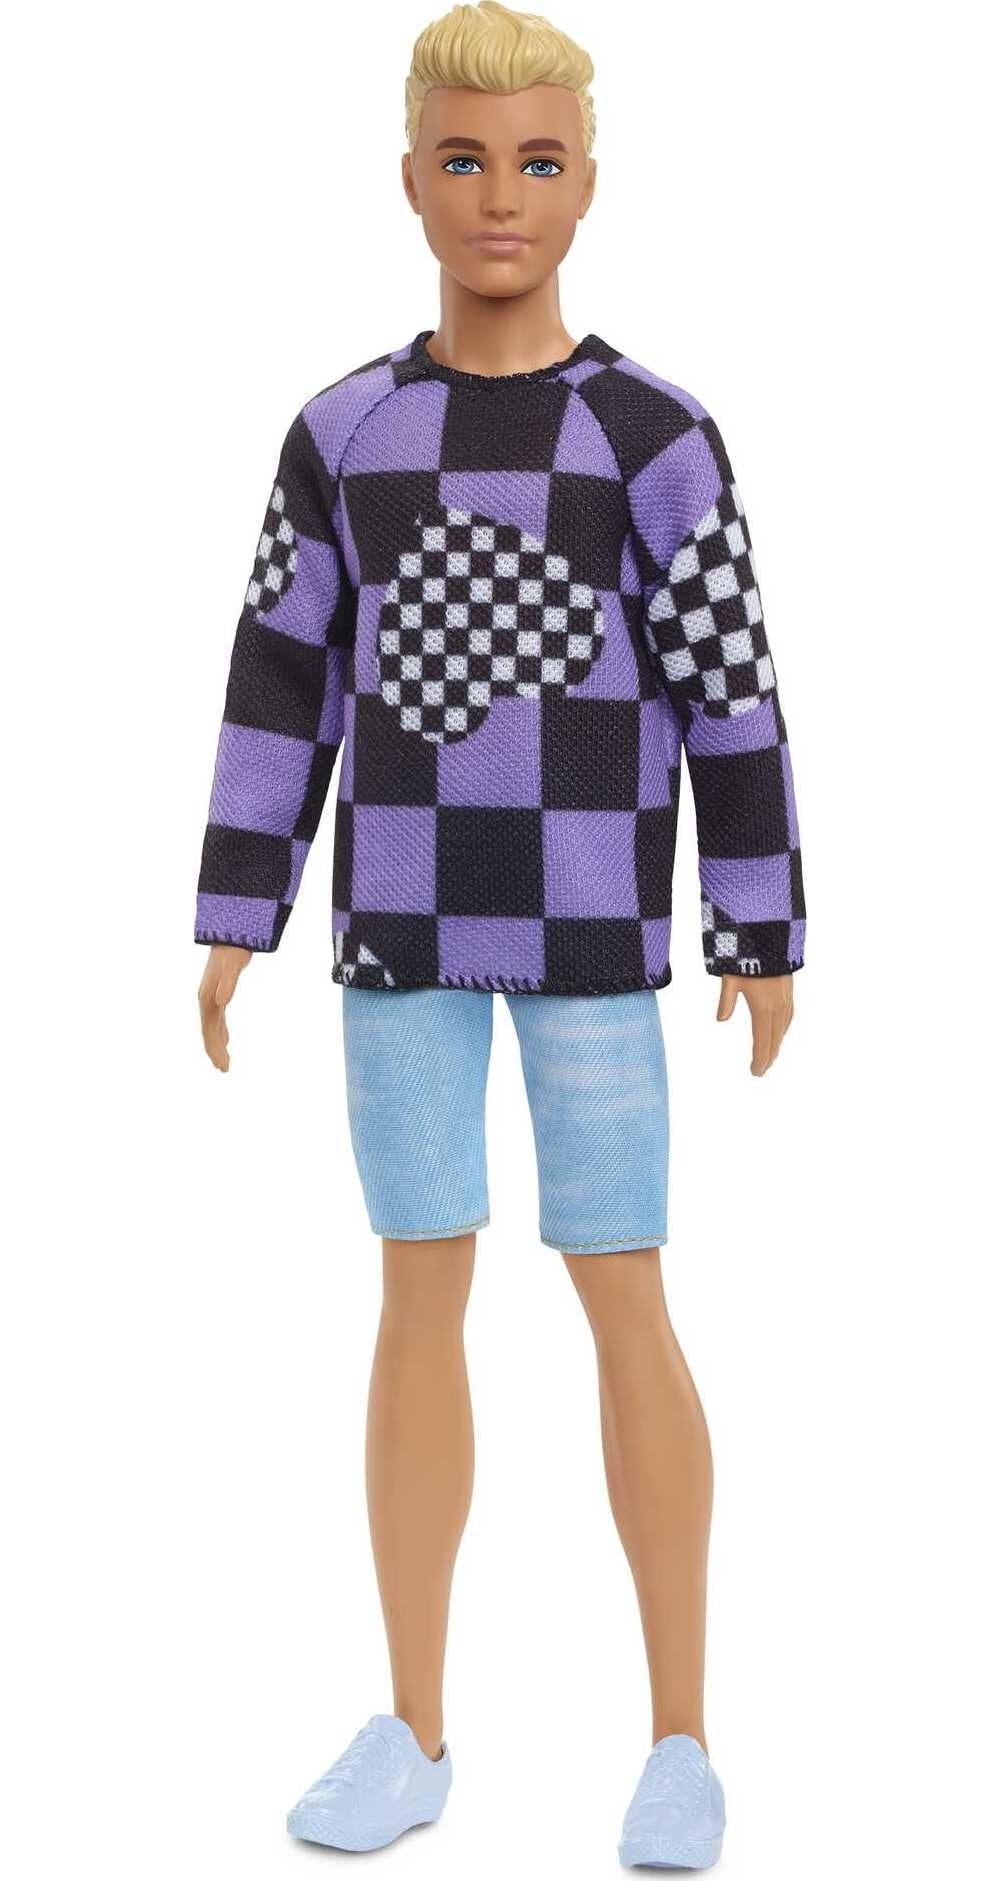 Fashionistas Ken Fashion Doll #191 in Sweater with Blonde Hair & Sneakers -